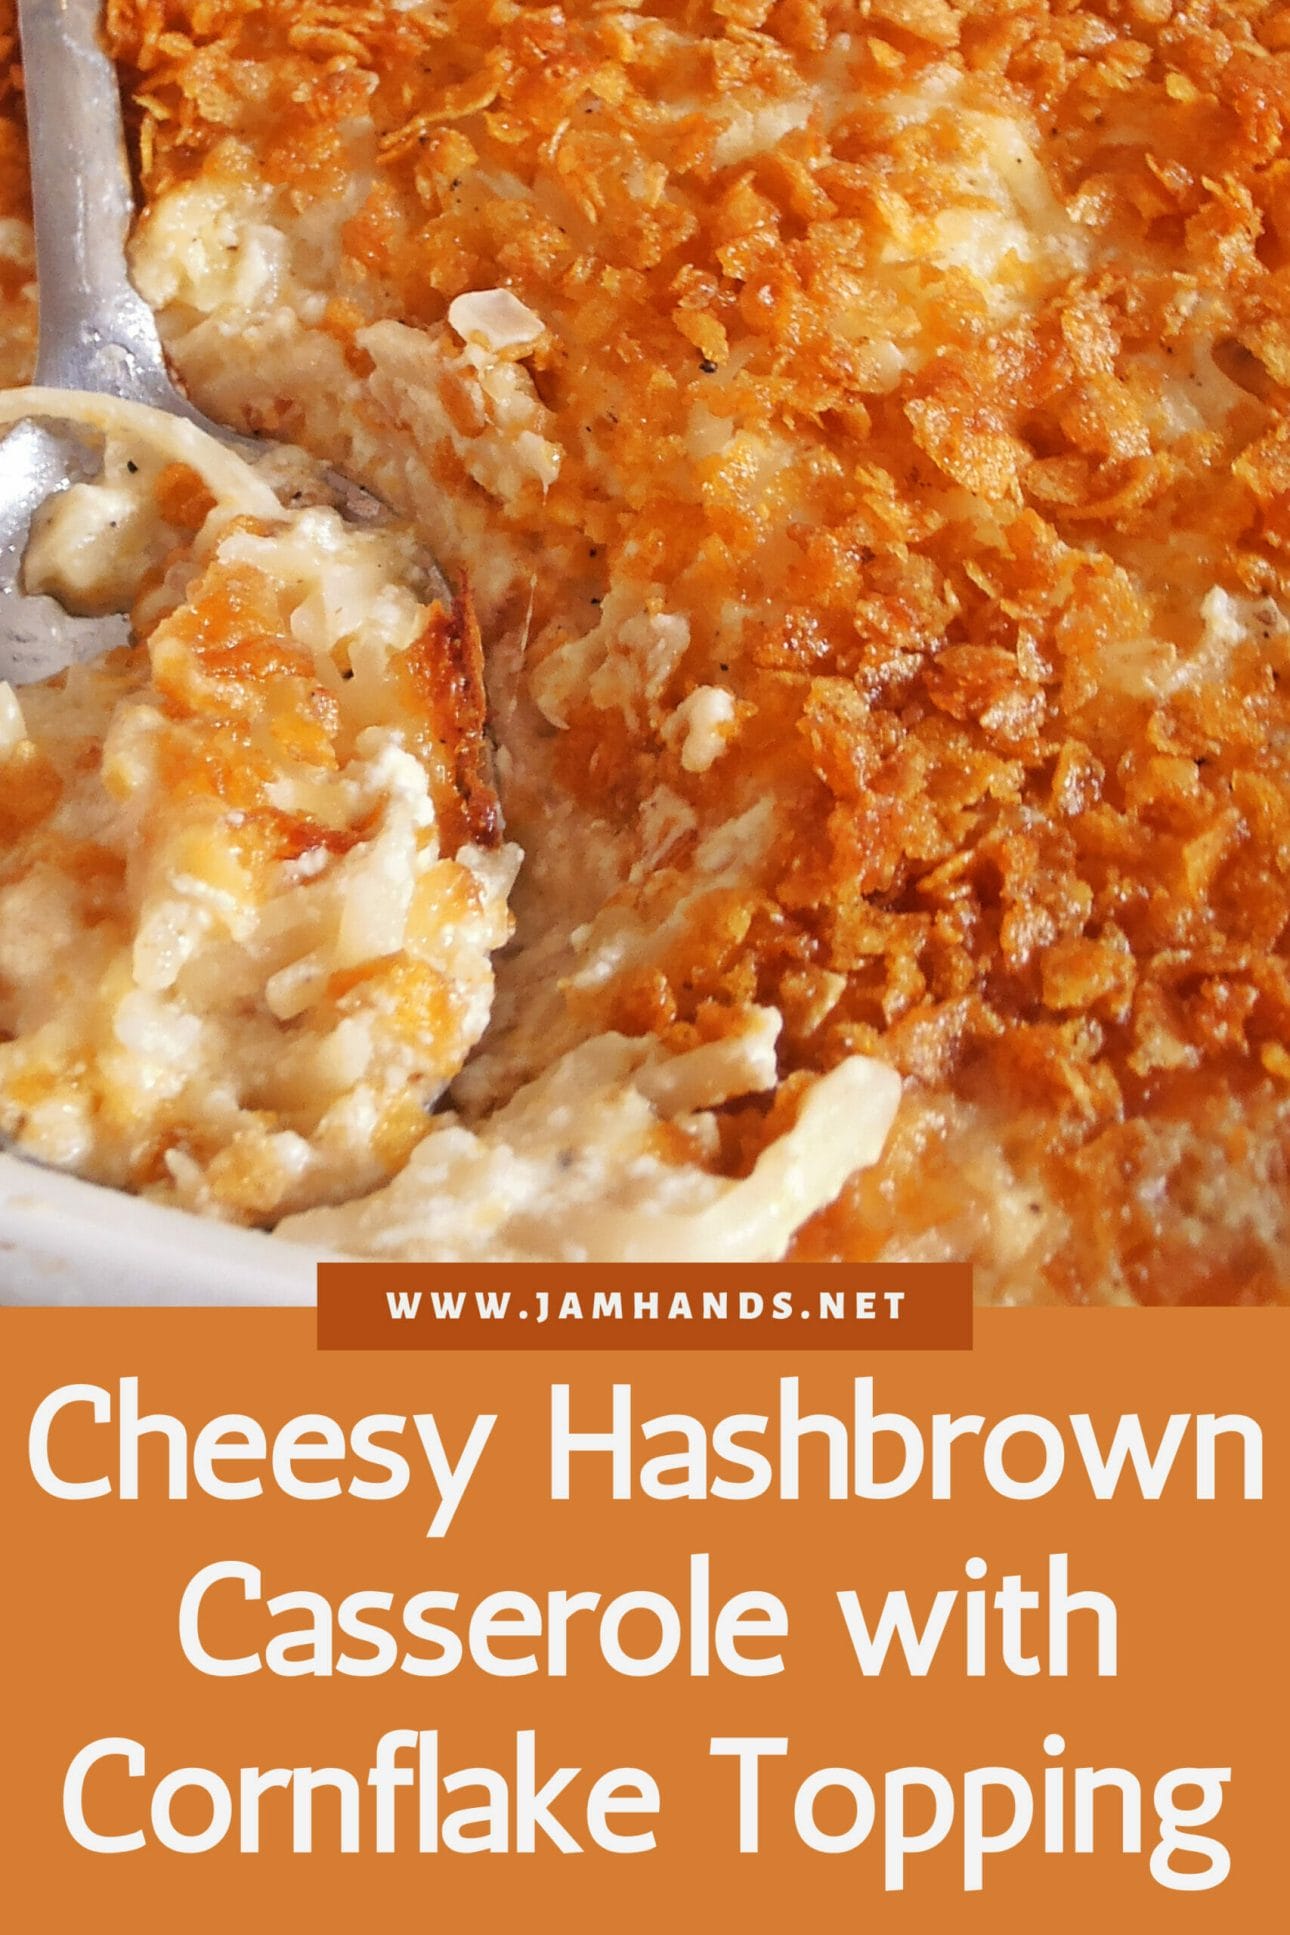 Cheesy Hashbrown Casserole with Corn Flake Topping